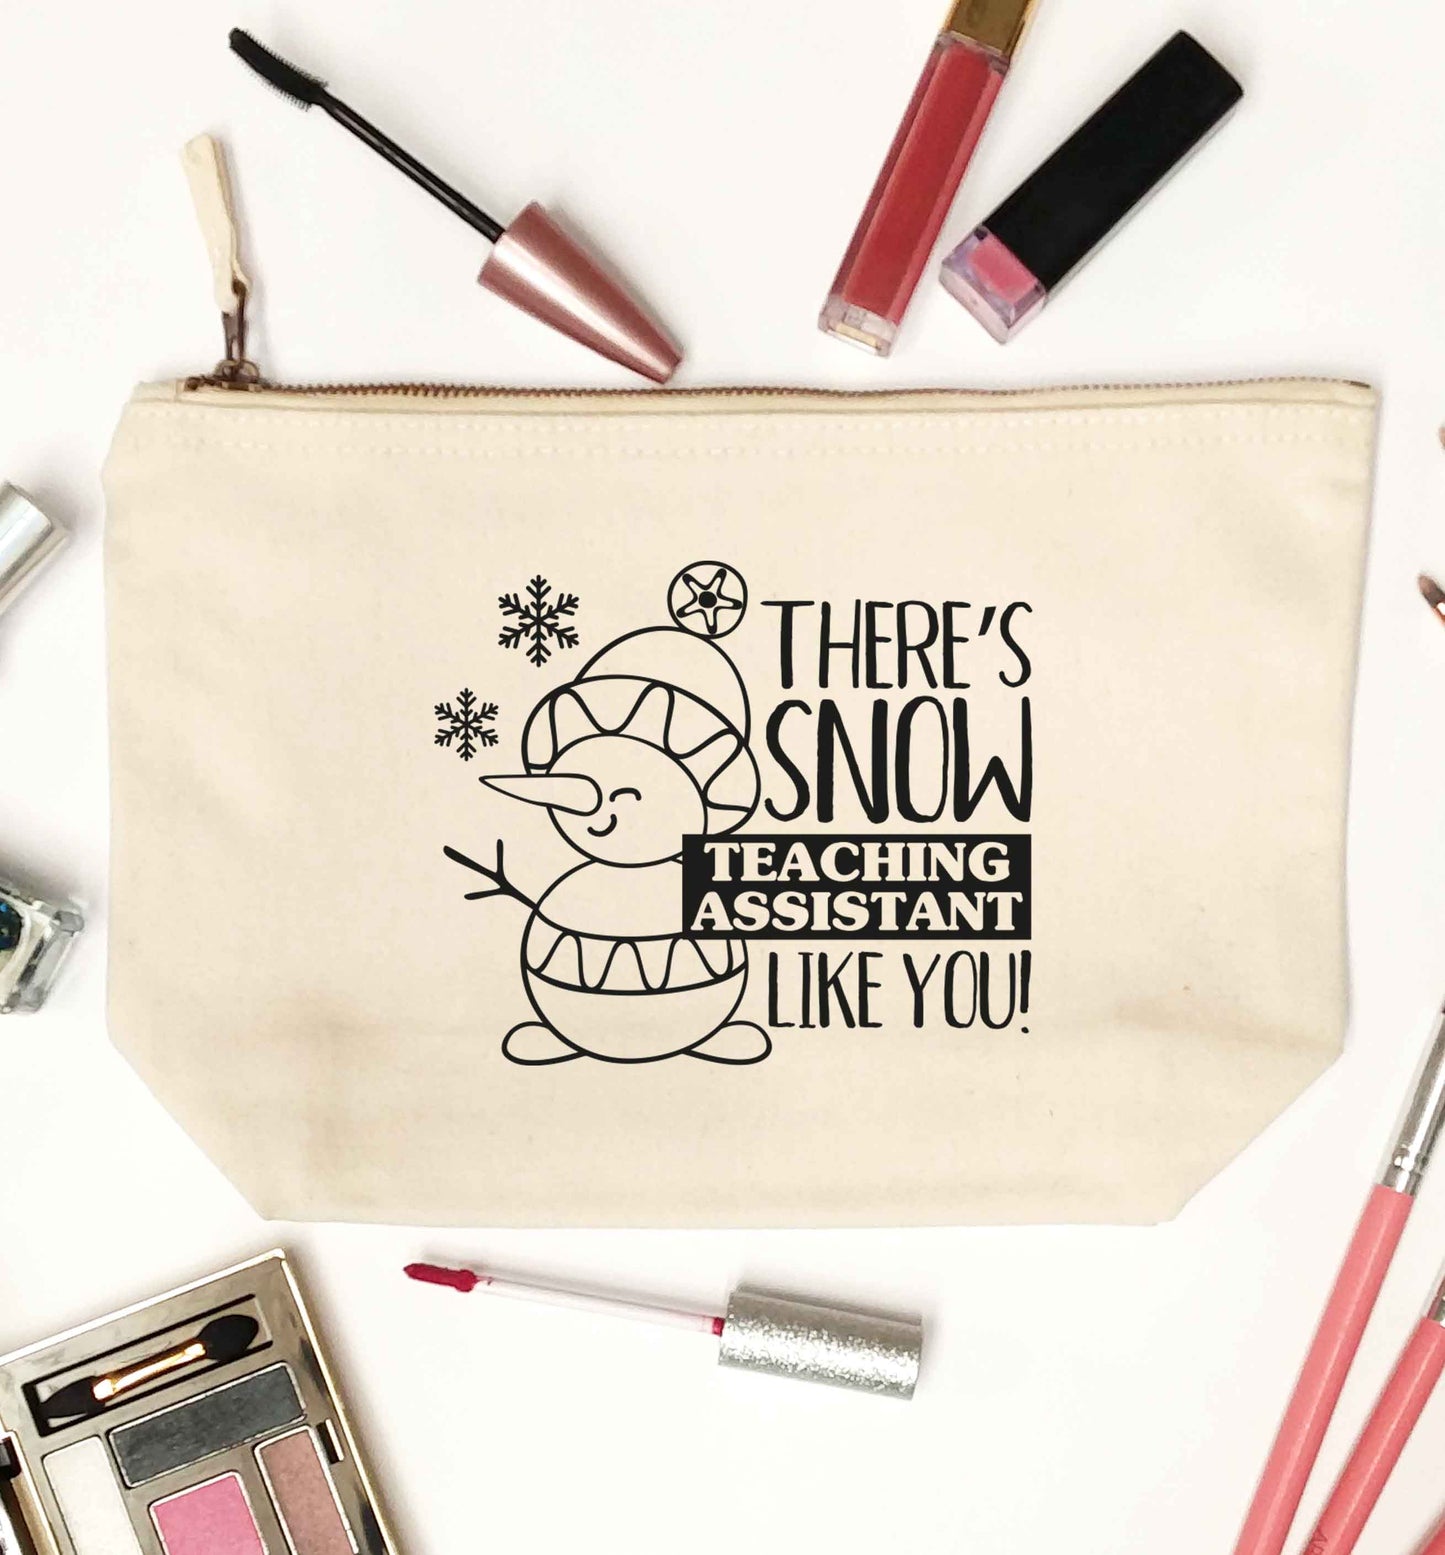 There's snow teaching assistant like you natural makeup bag